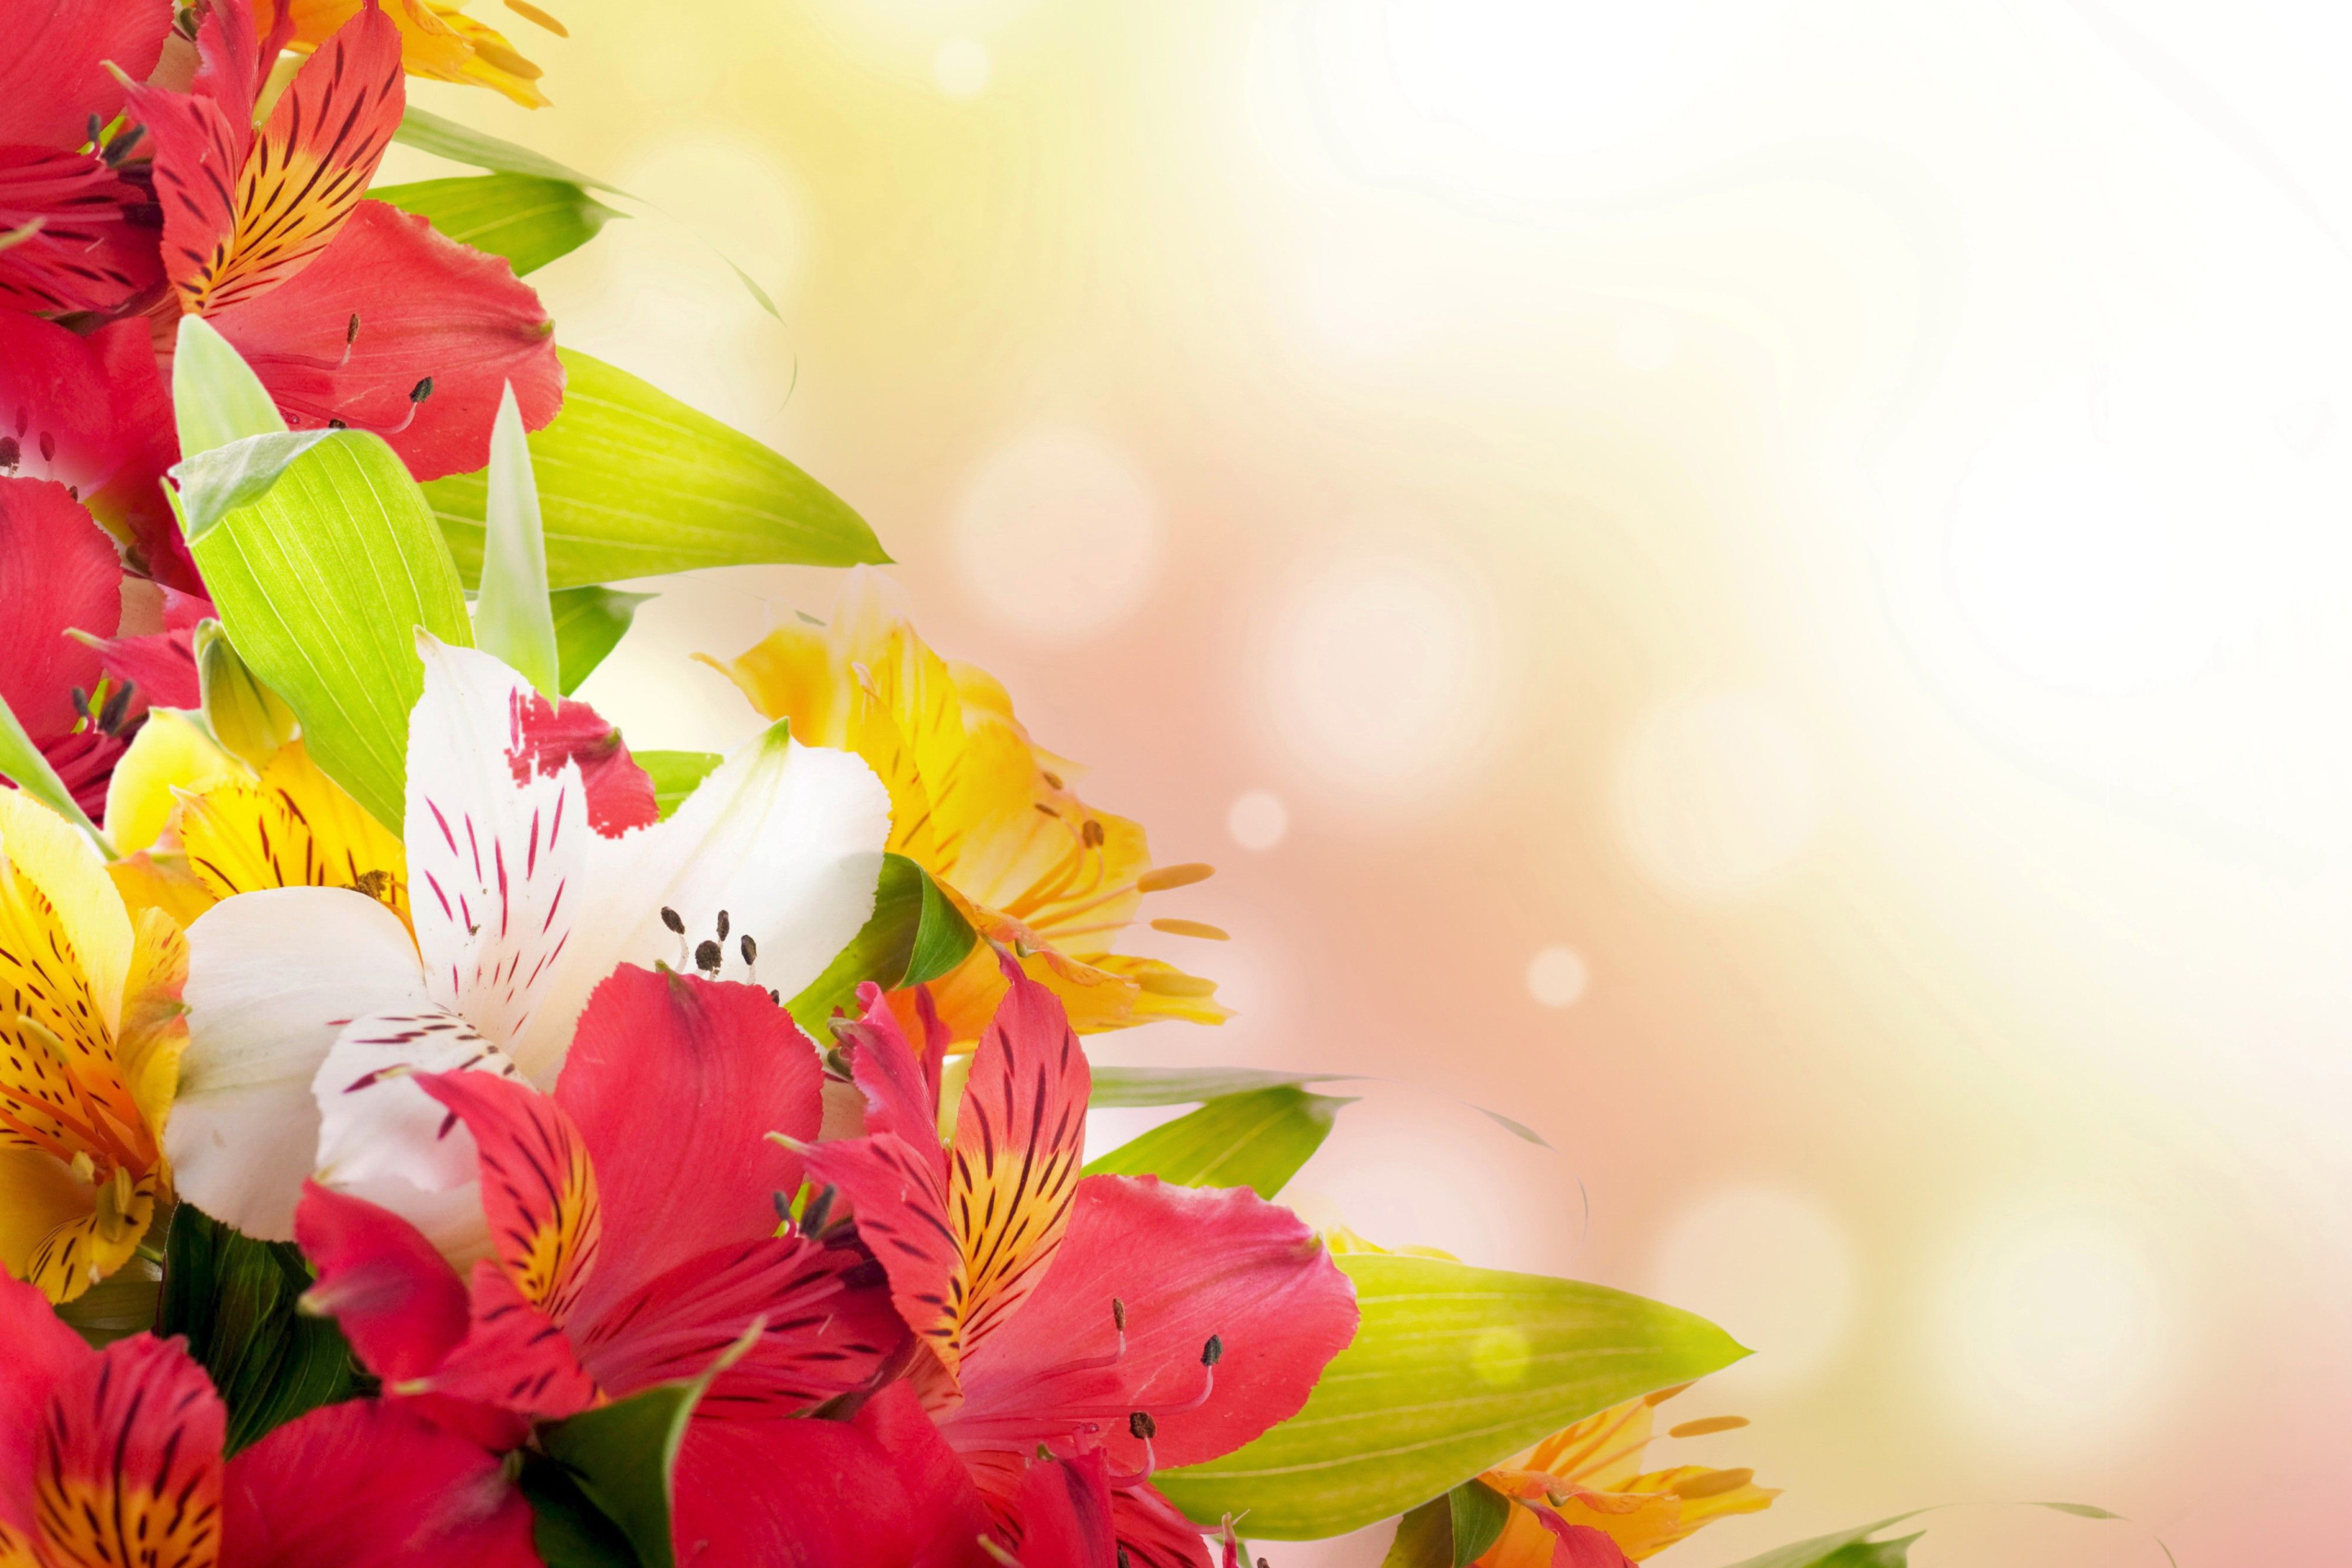 Flowers for the holiday of March 8 wallpaper 2880x1920